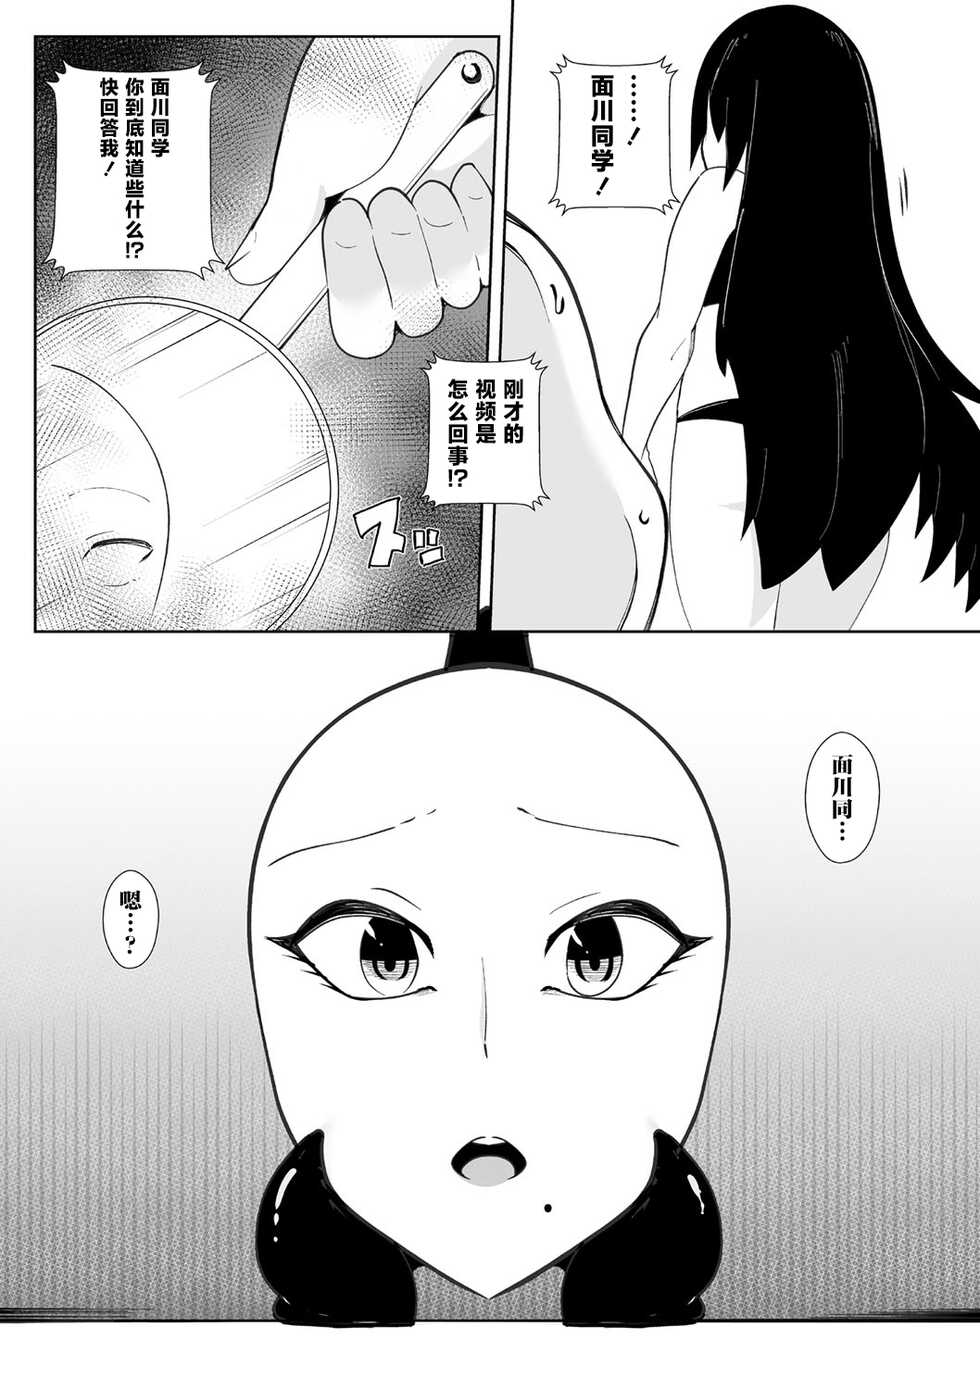 [Totorina] GiVE ME FACE (COMIC Necrosis Vol. 2) [Chinese] [不咕鸟汉化组] - Page 12